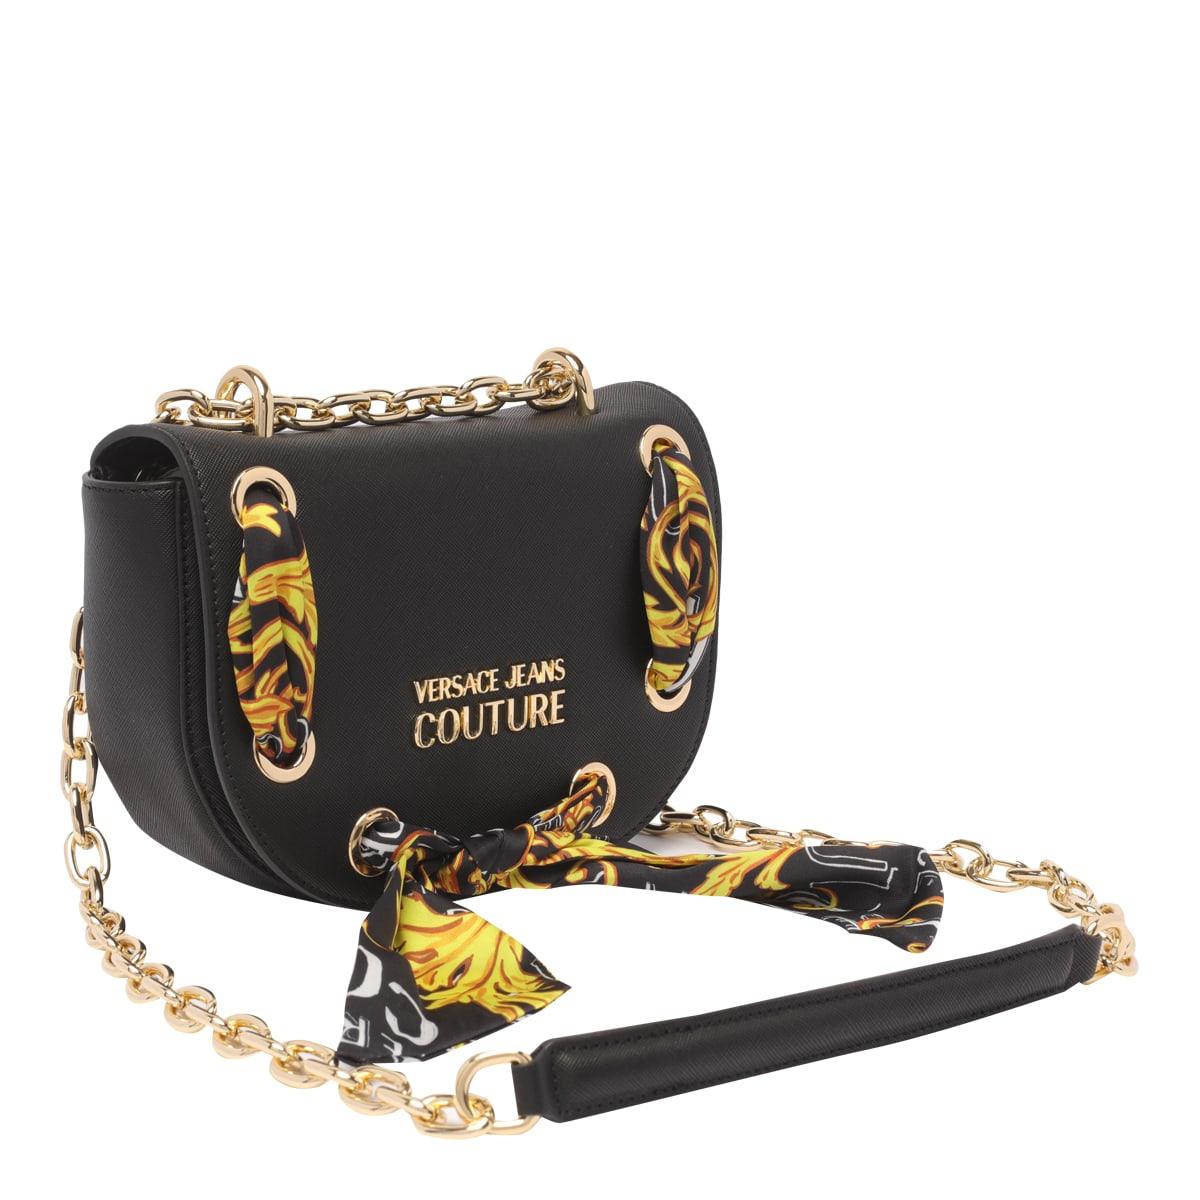 Versace Jeans Couture Crossbody Bag in Black | Lyst